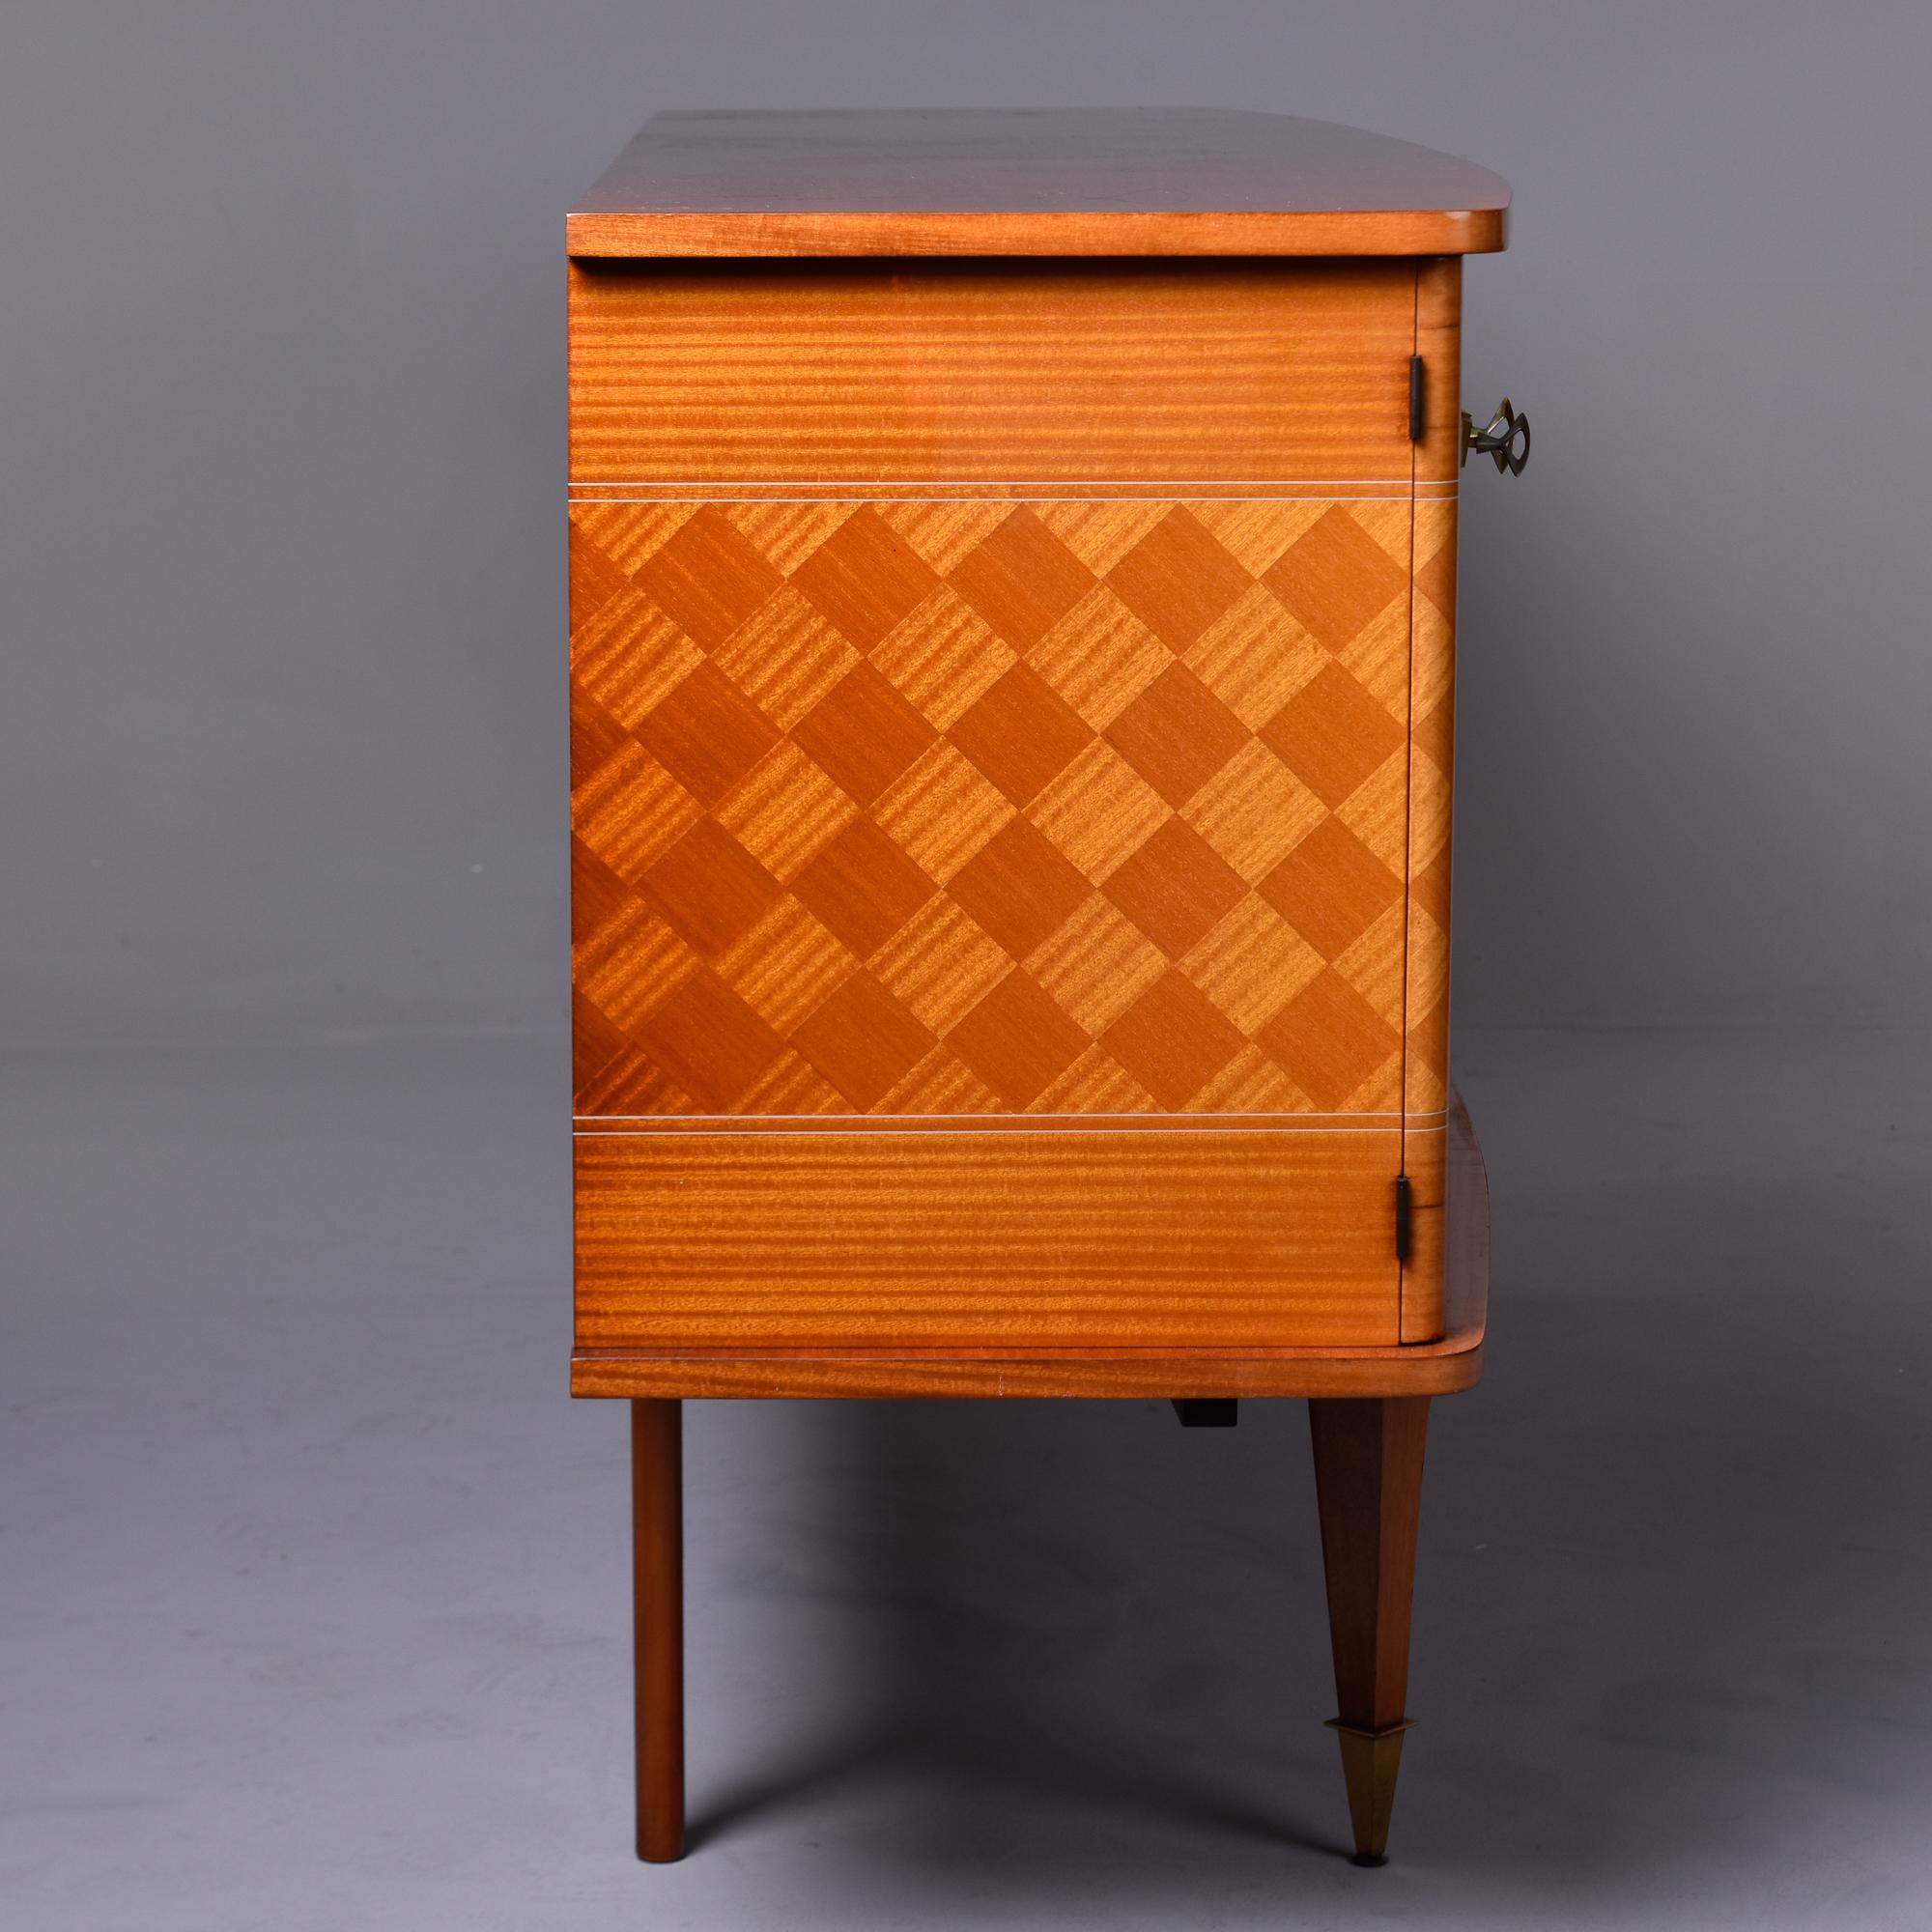 French Art Deco Mahogany Buffet Sideboard Credenza with Checkerboard Parquetry For Sale 8